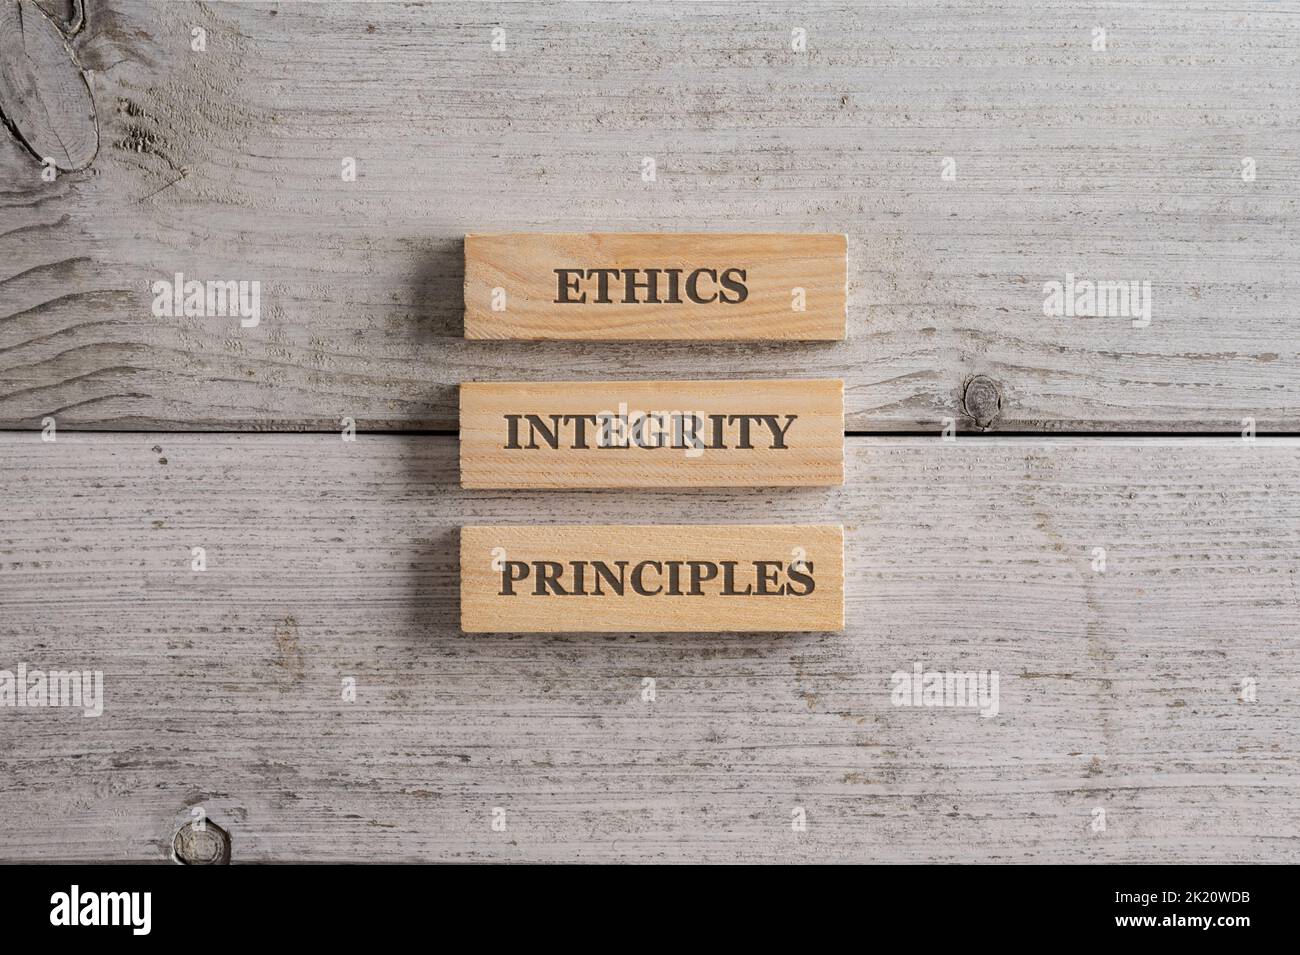 Words Ethics, Integrity and Principles written on three stacked wooden blocks placed over white wooden background. Stock Photo